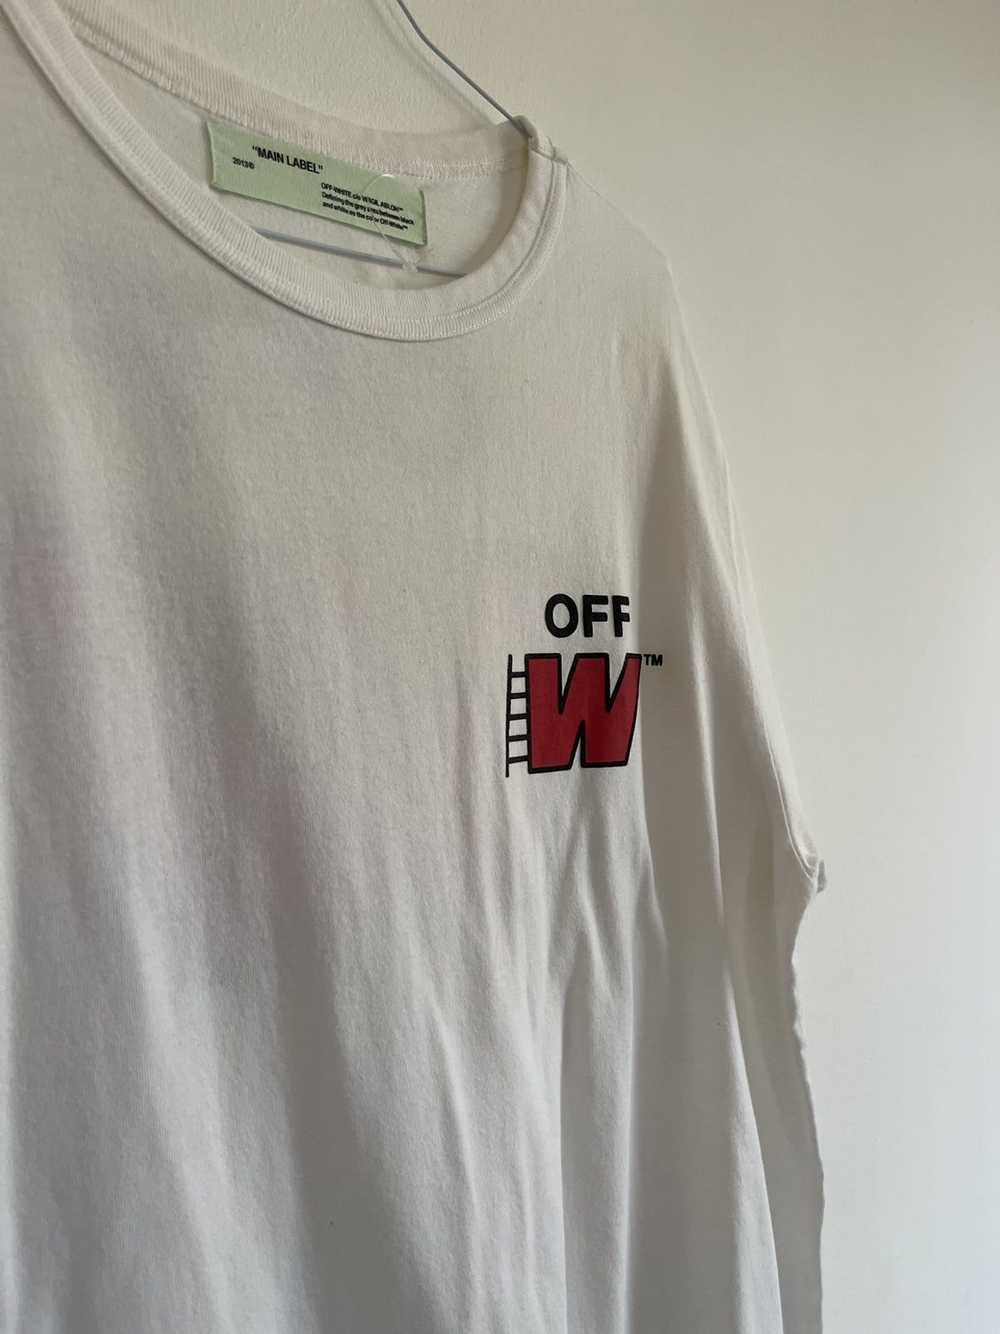 Off-White Off white Ladder TEE *LIMITED* - image 7